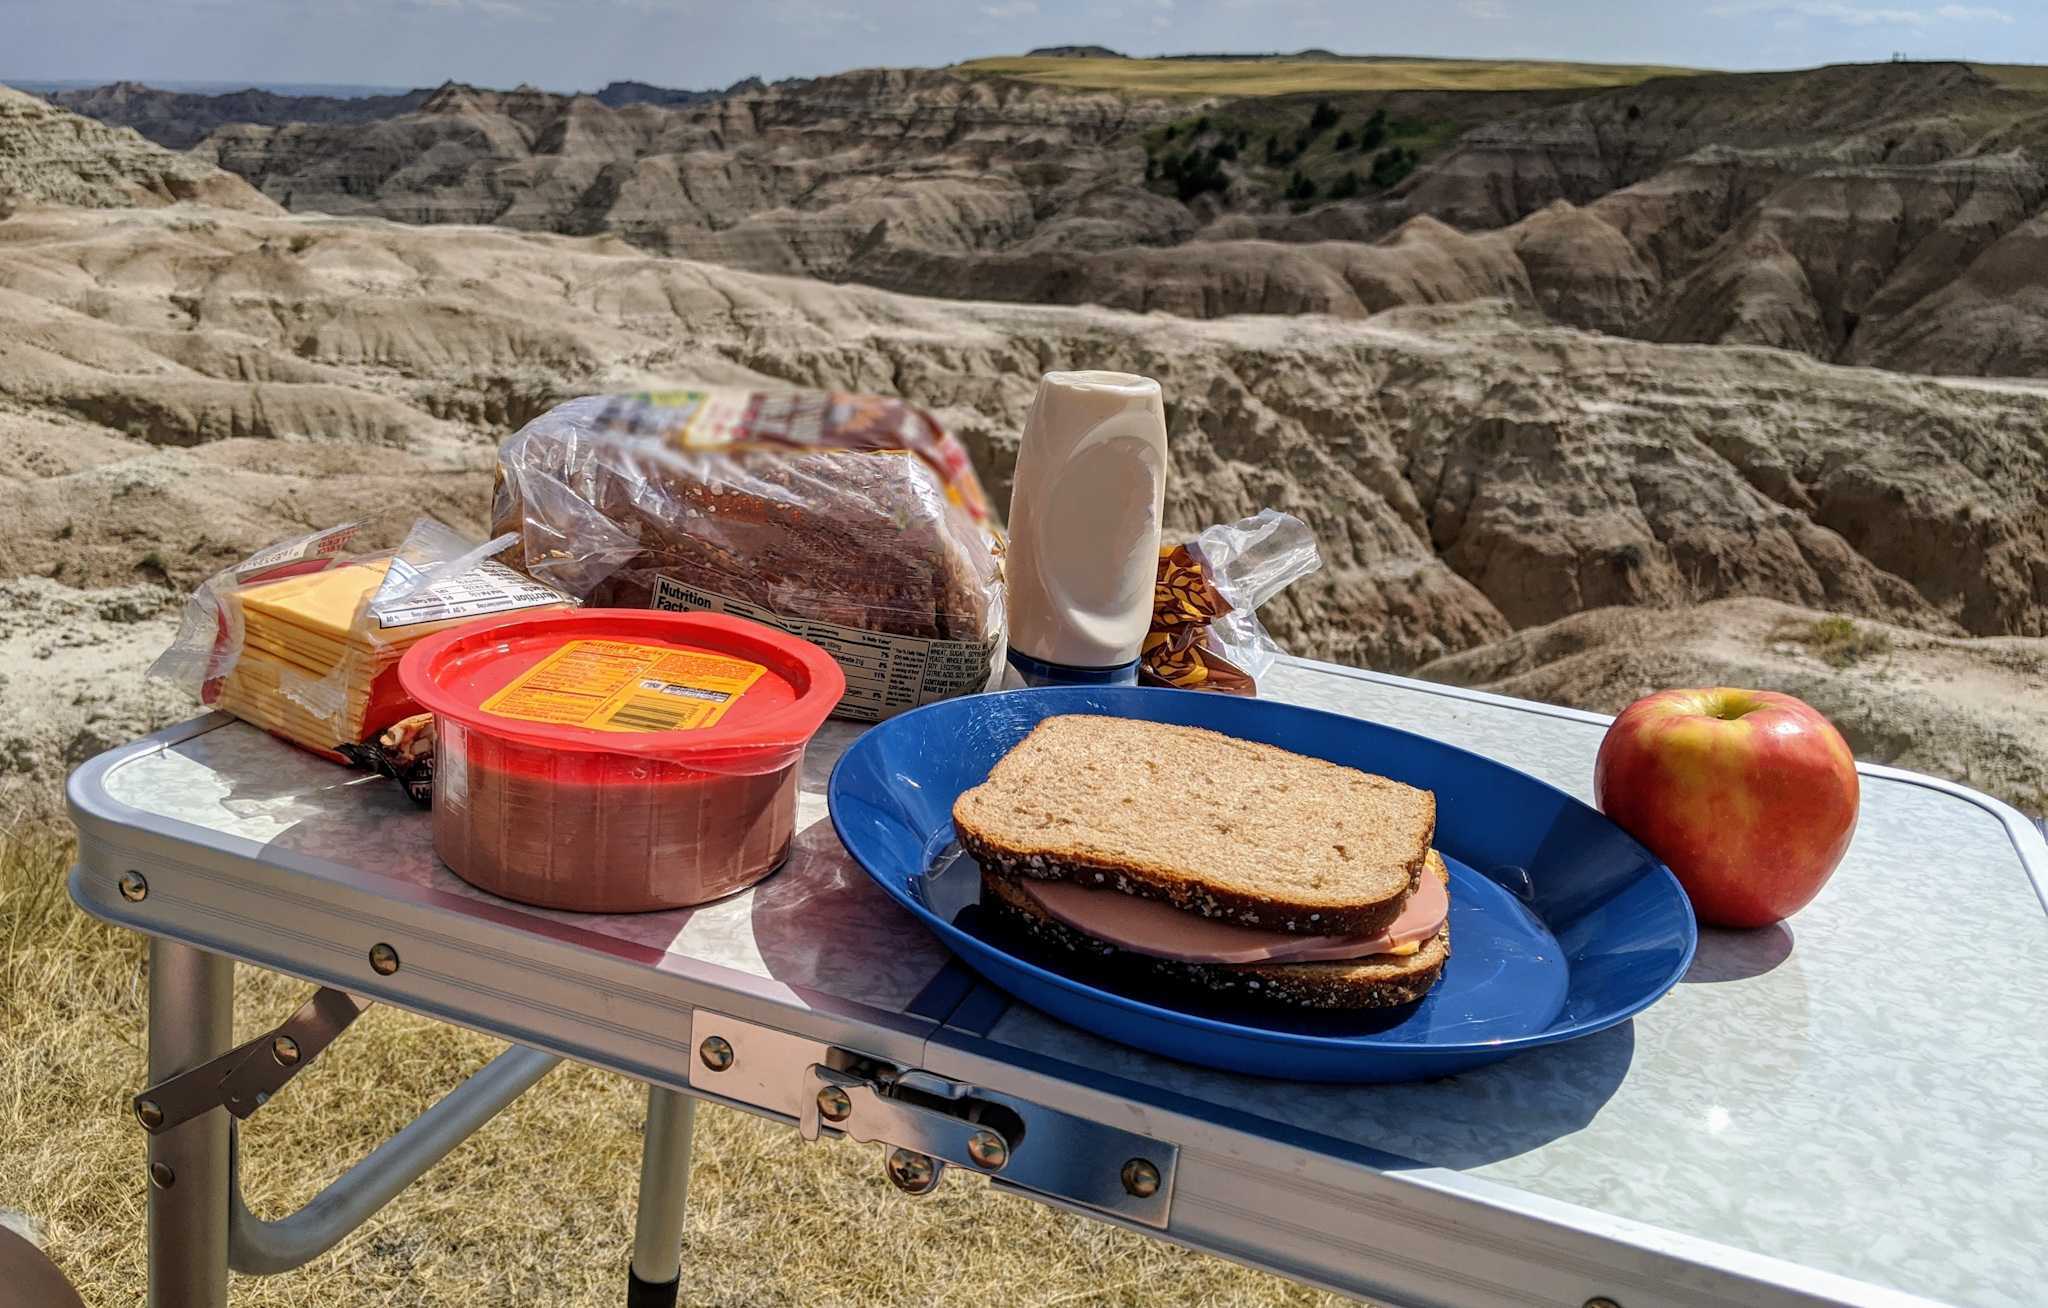 A table with the materials to make a sandwich, a sandwich, and an apple. The table is set out in front of a rocky landscape.